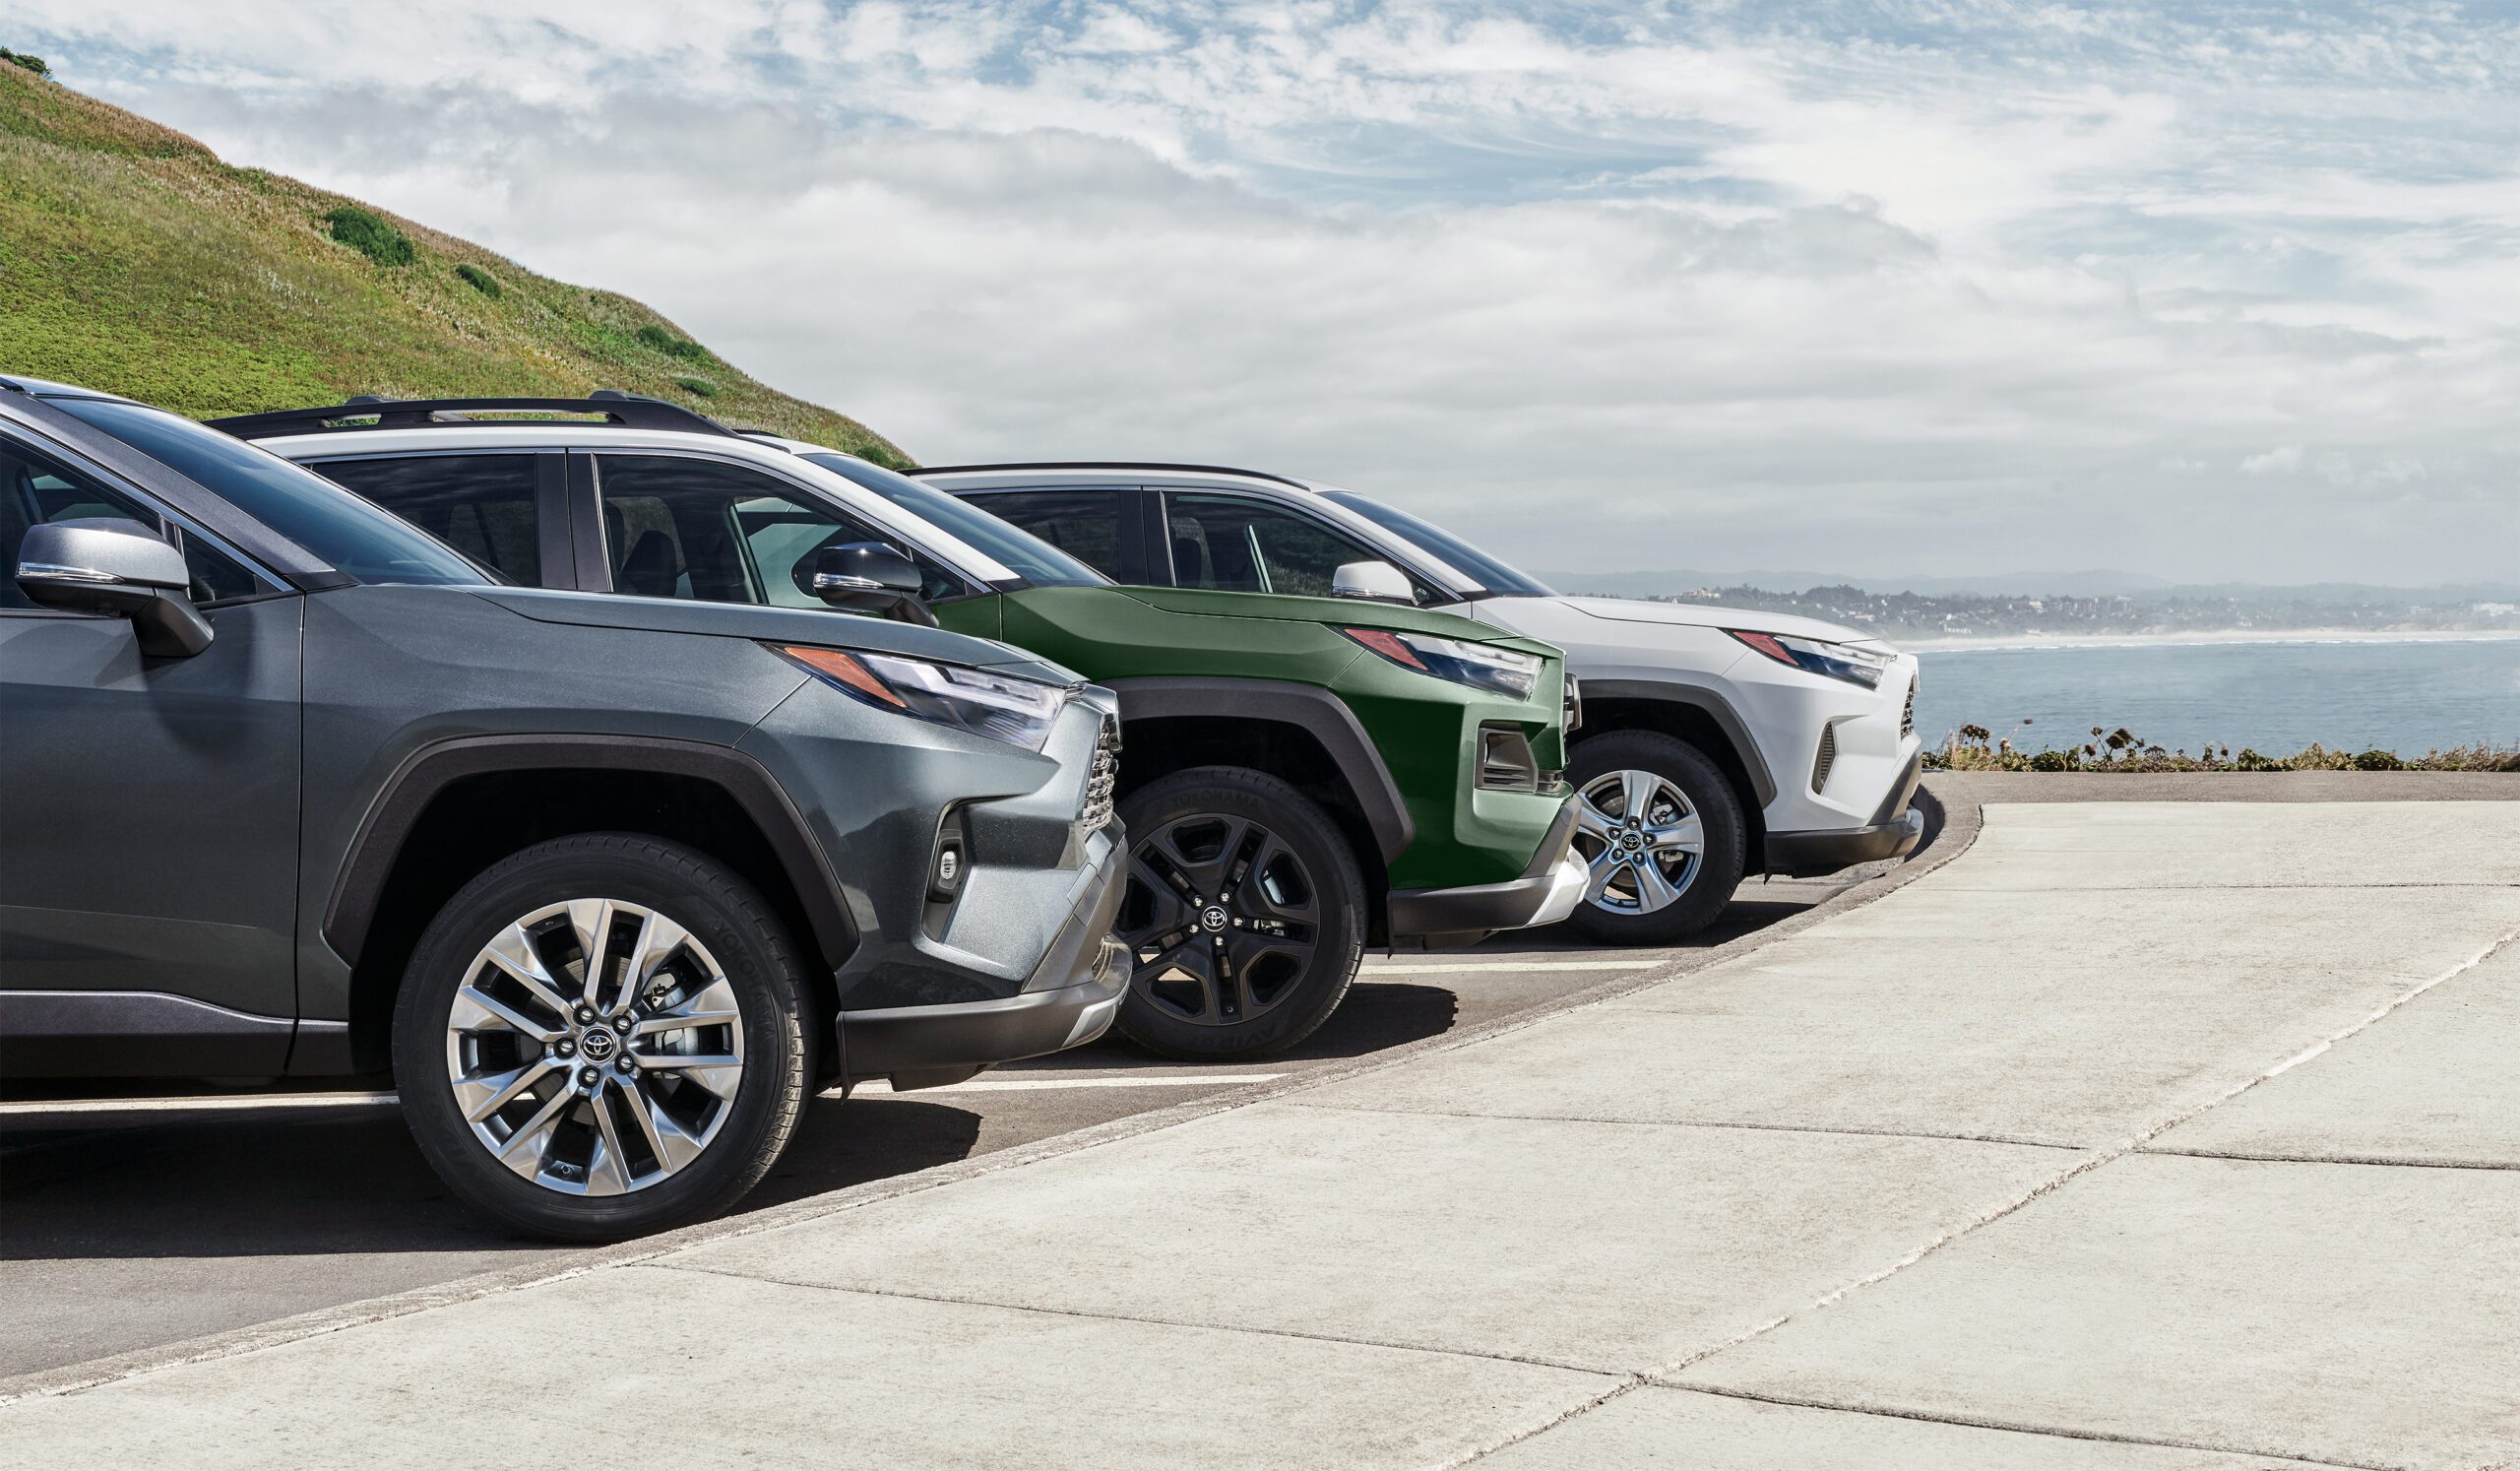 Army Green Rav4 w/ others